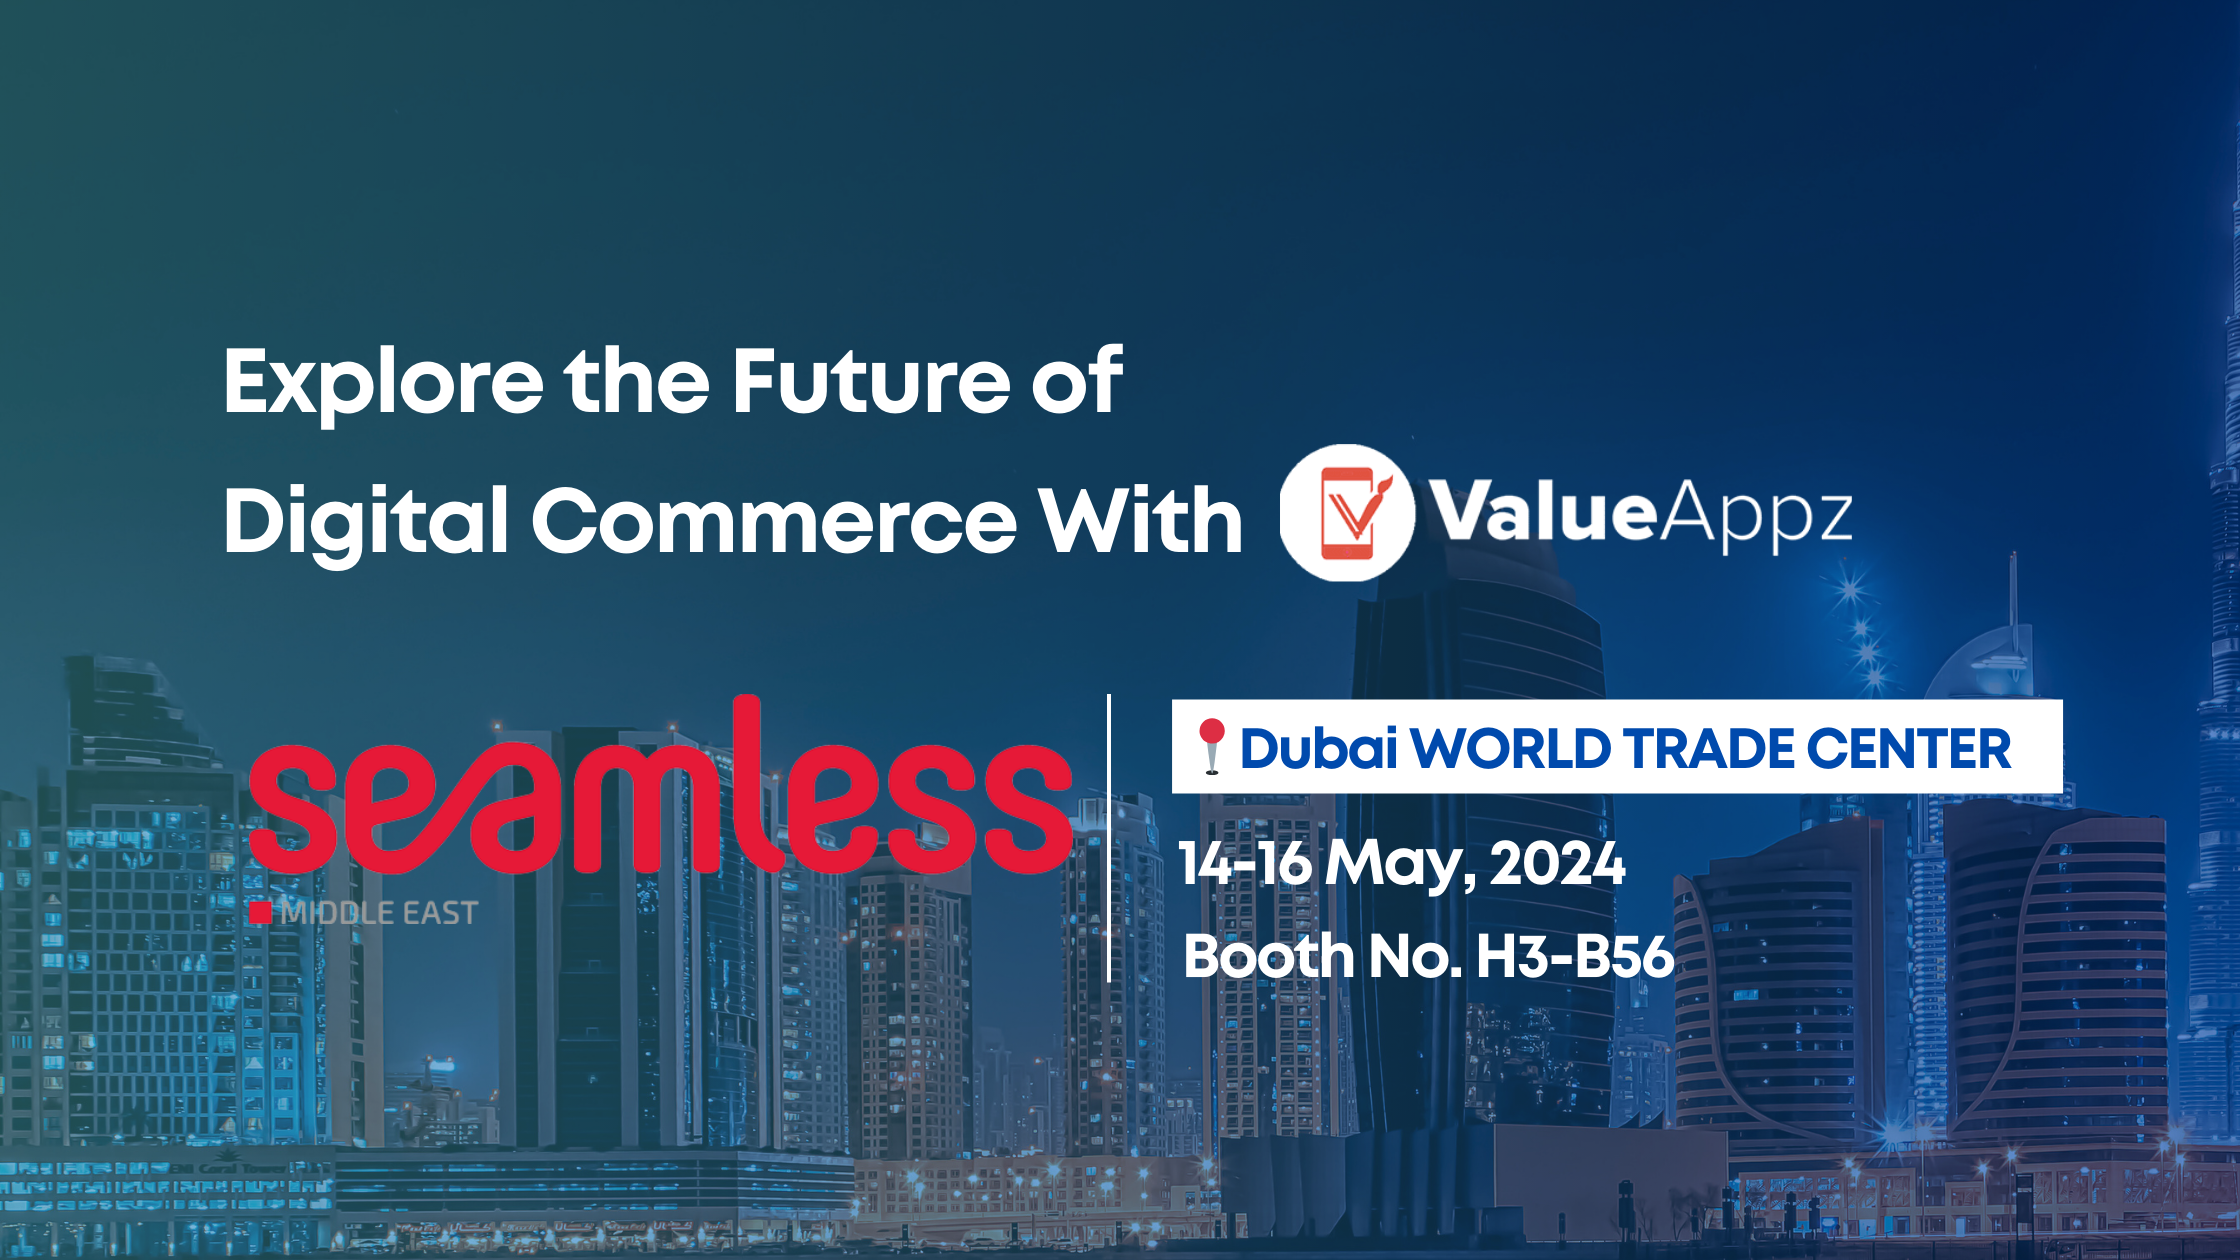 Seamless Middle East Digital Commerce Event